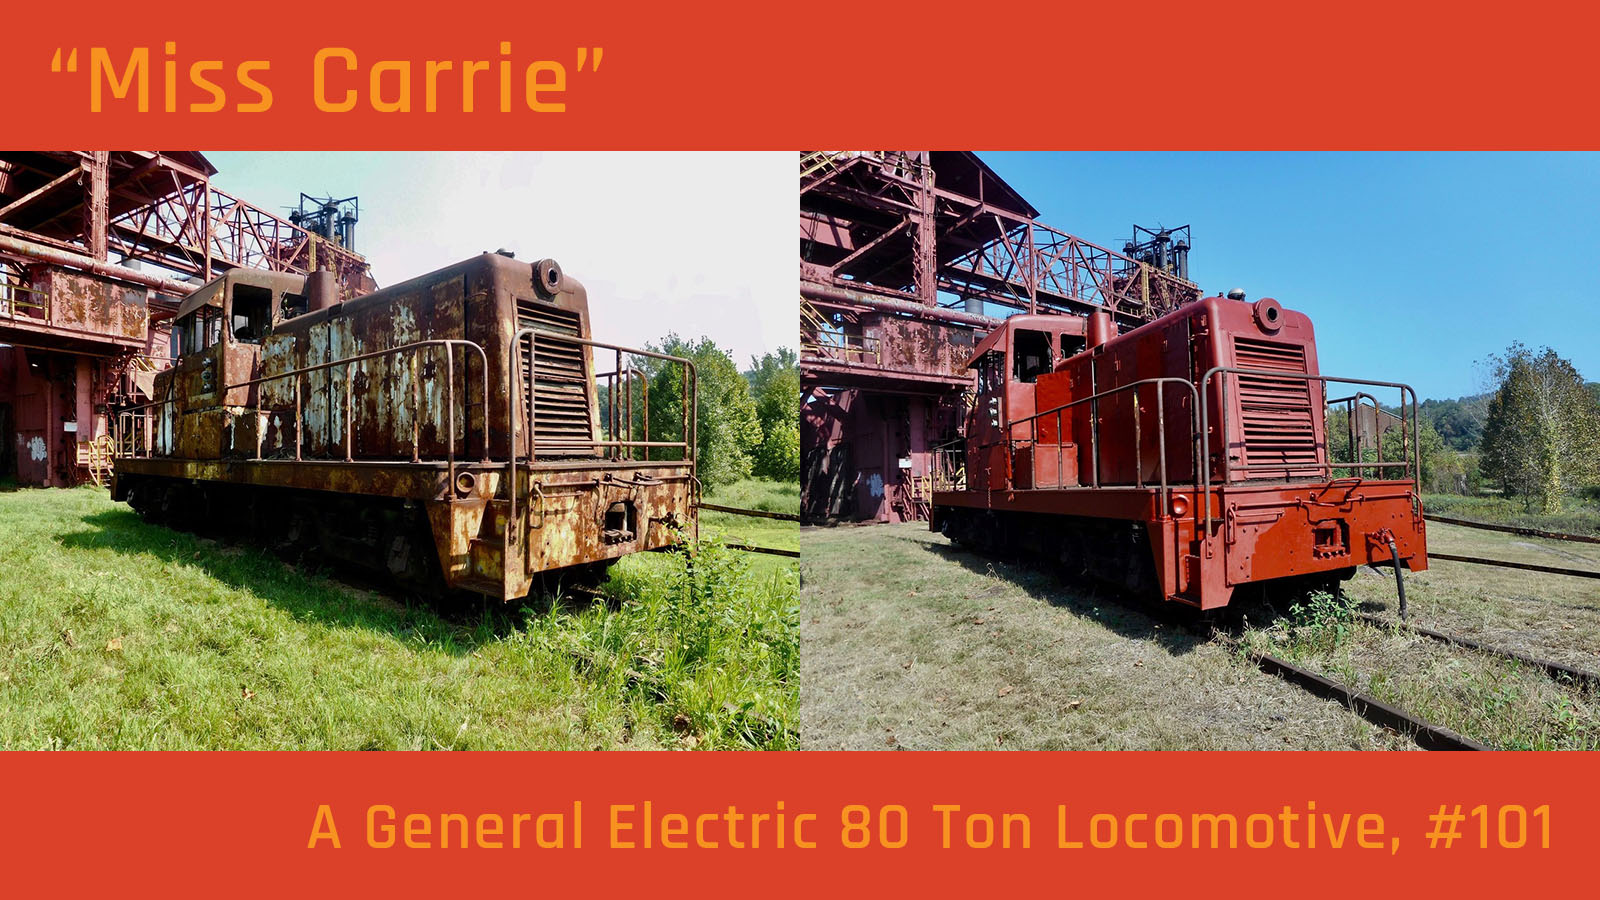 "Miss Carrie", a GE 80 ton locomotive, Before and After